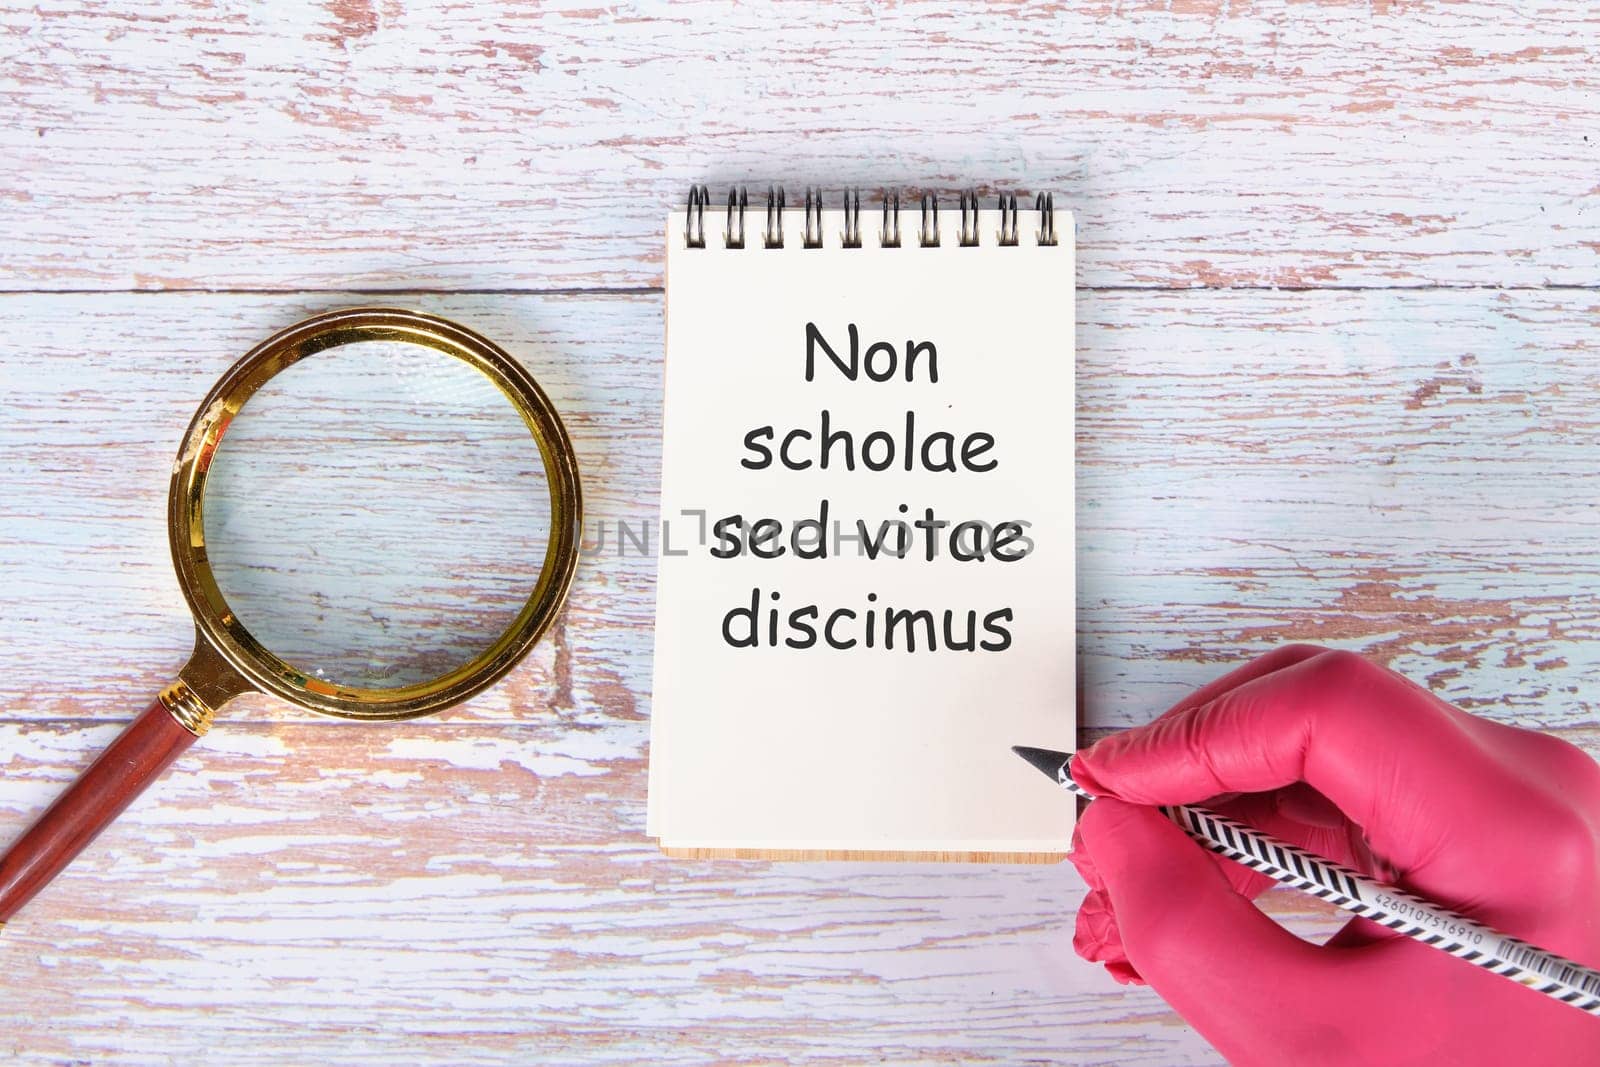 Non scholae sed vitae discimus It is translated from Latin as We study not for school, but for life. written in pencil on a notebook